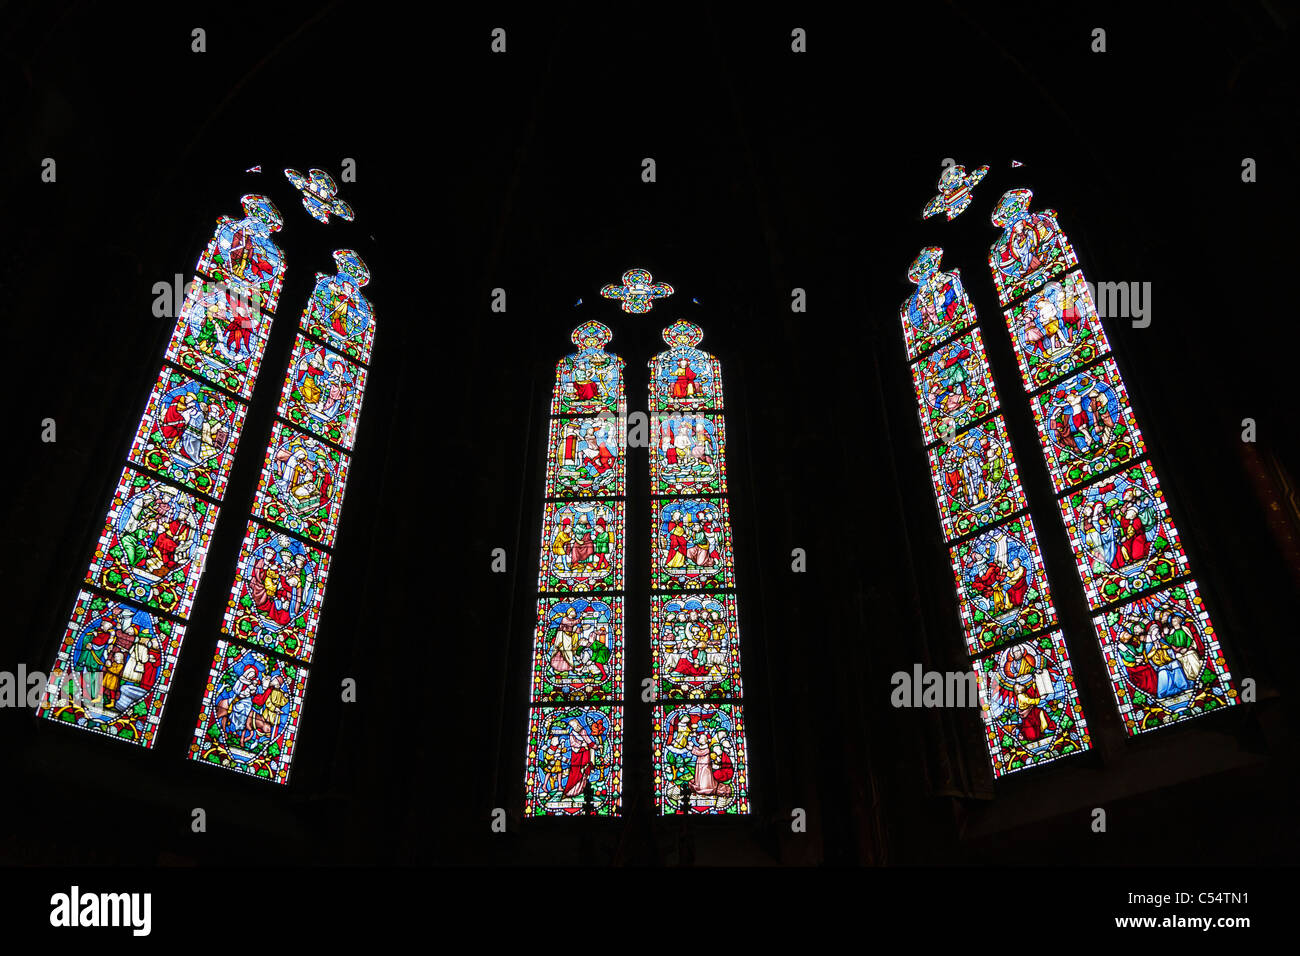 Stained glass window in the Church of our Lady, Brugge Belgium 2 Stock Photo